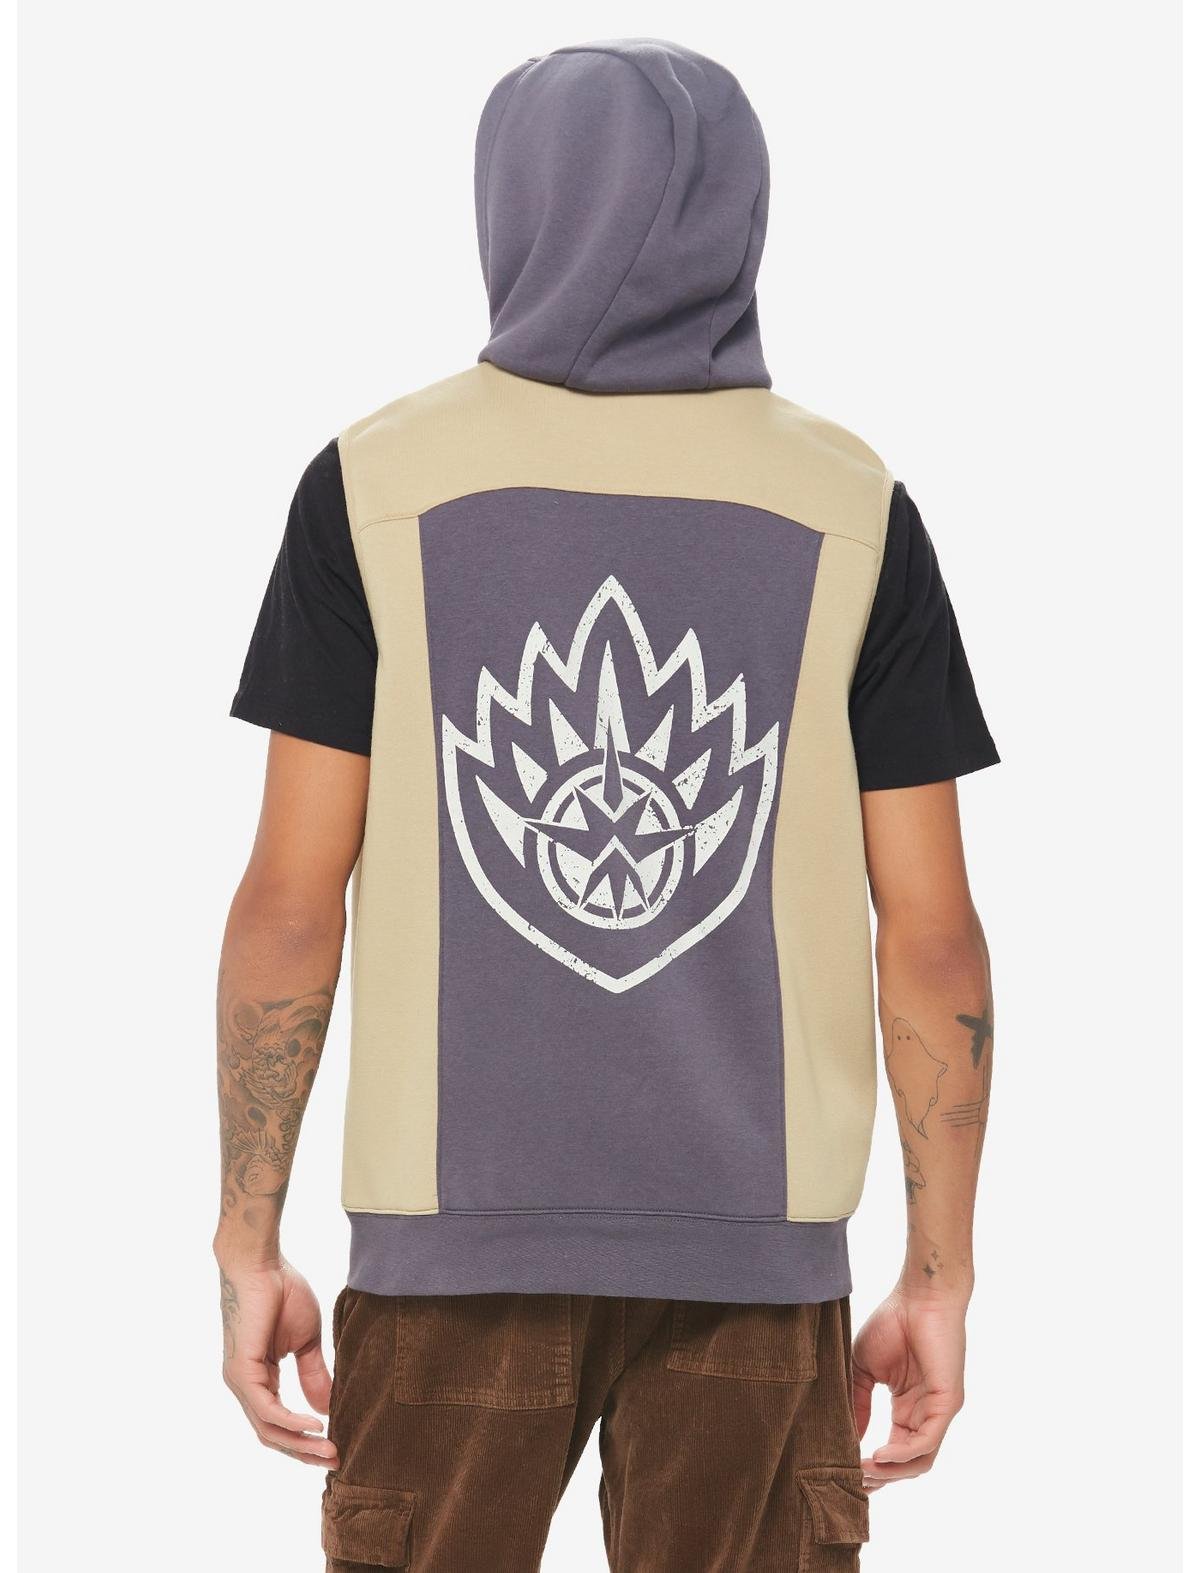 Our Universe Marvel Guardians Of The Galaxy Drax Sleeveless Hoodie